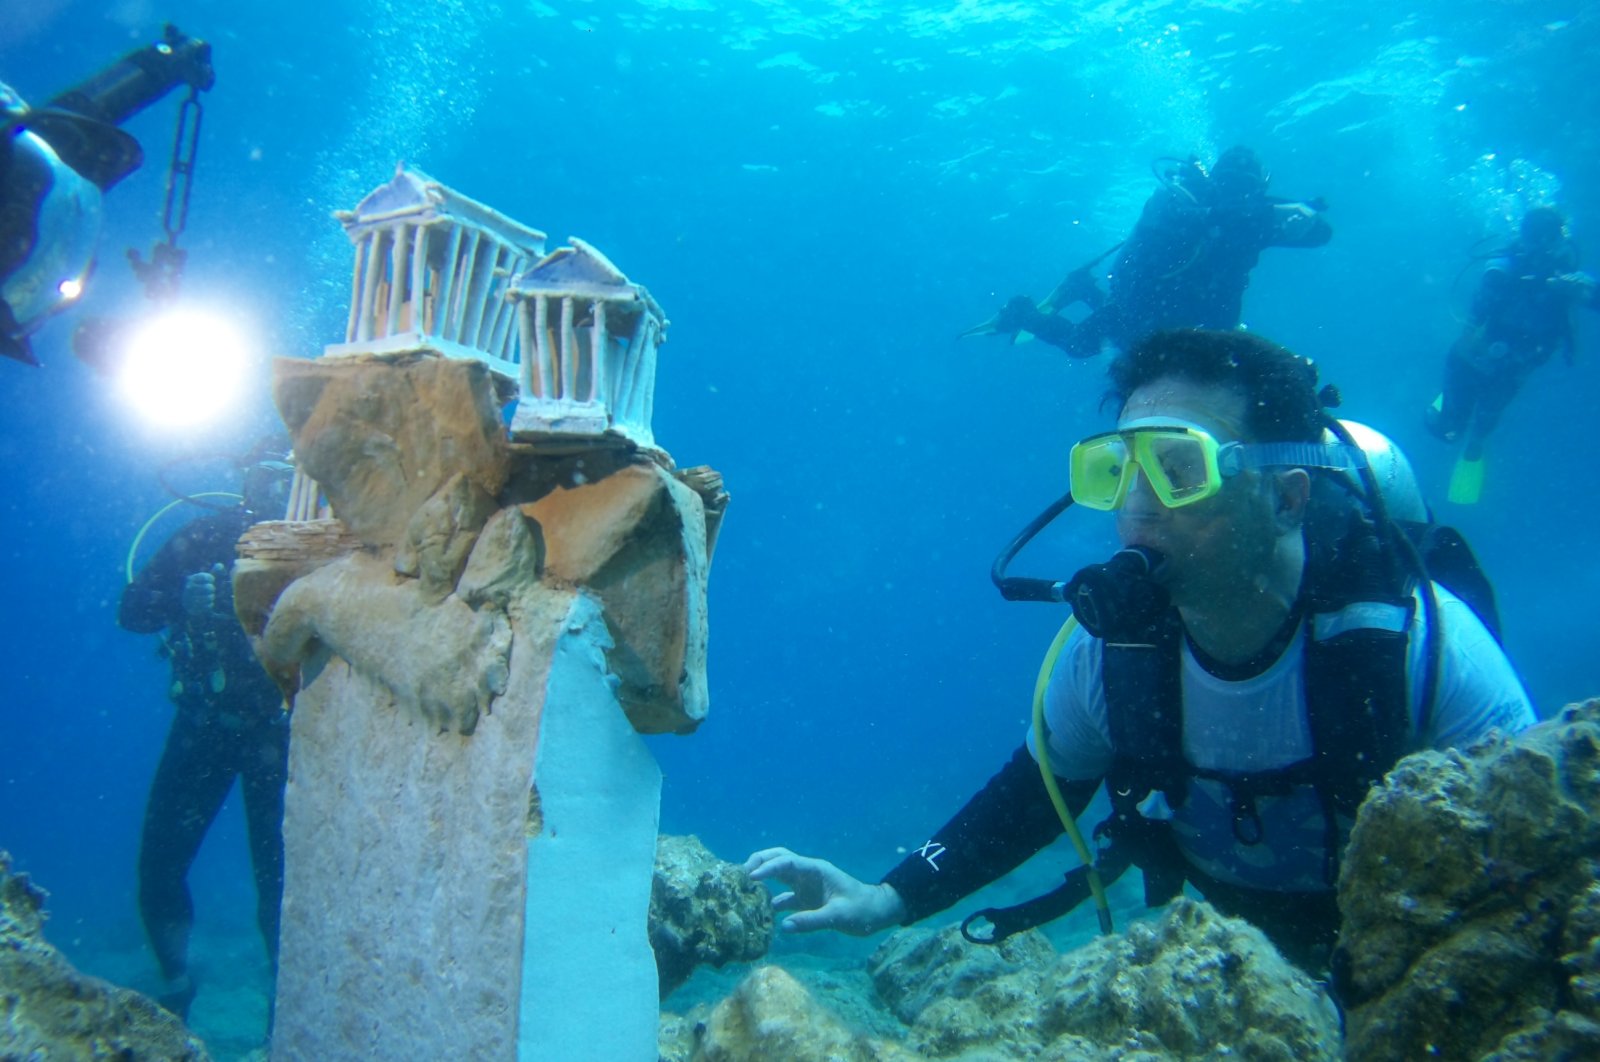 Around 22 ceramic and sculpture pieces have been started to be displayed in an underwater exhibition in the Bodrum district of Muğla, Turkey, May 23, 2022. (AA Photo)